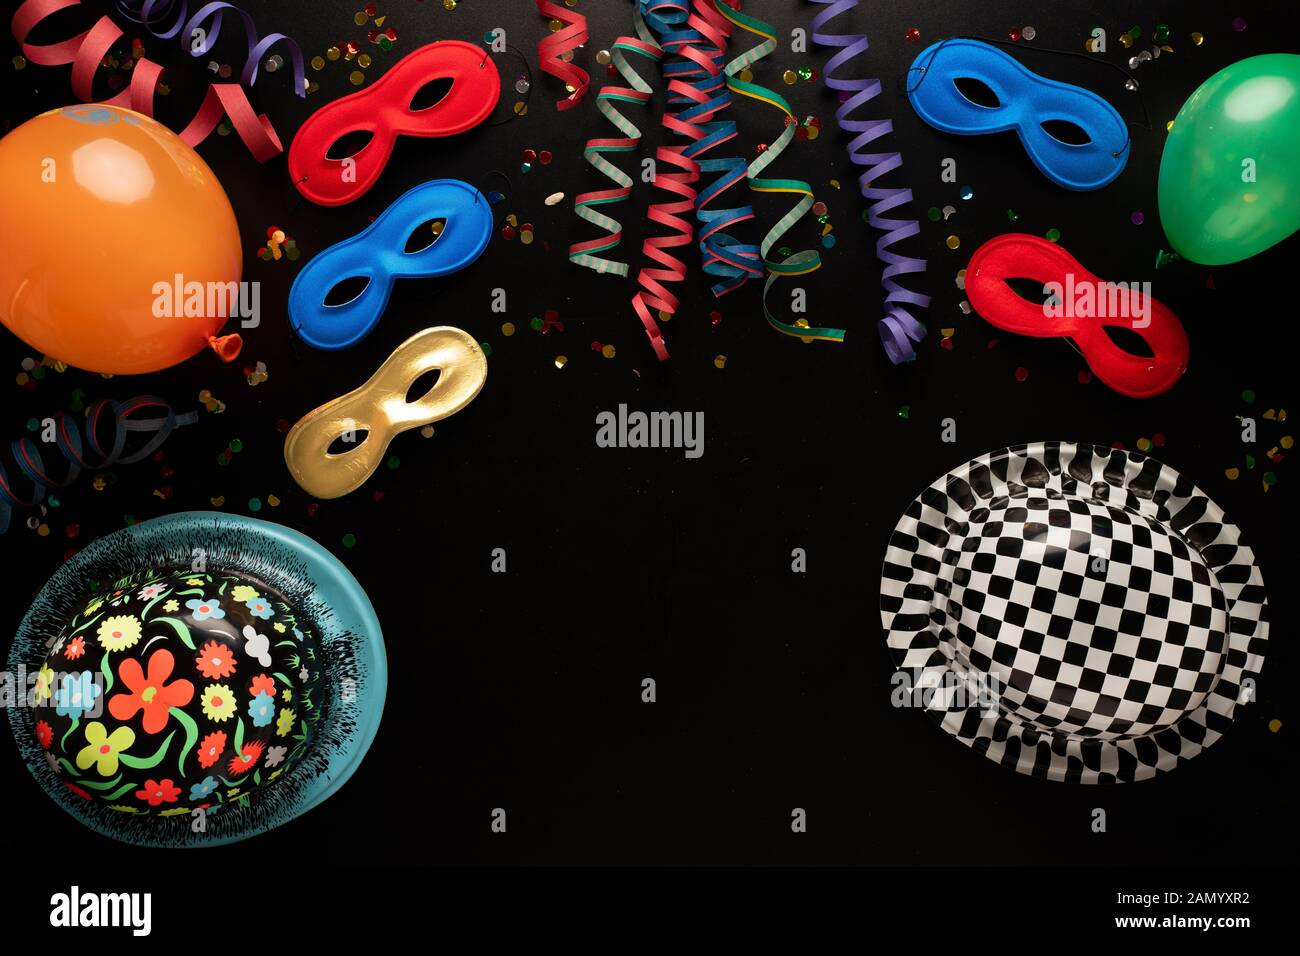 Carnival objects on a black background. Coiled streamers, masks, paper skeleton, confetti, paper balloons and many other carnival objects Stock Photo